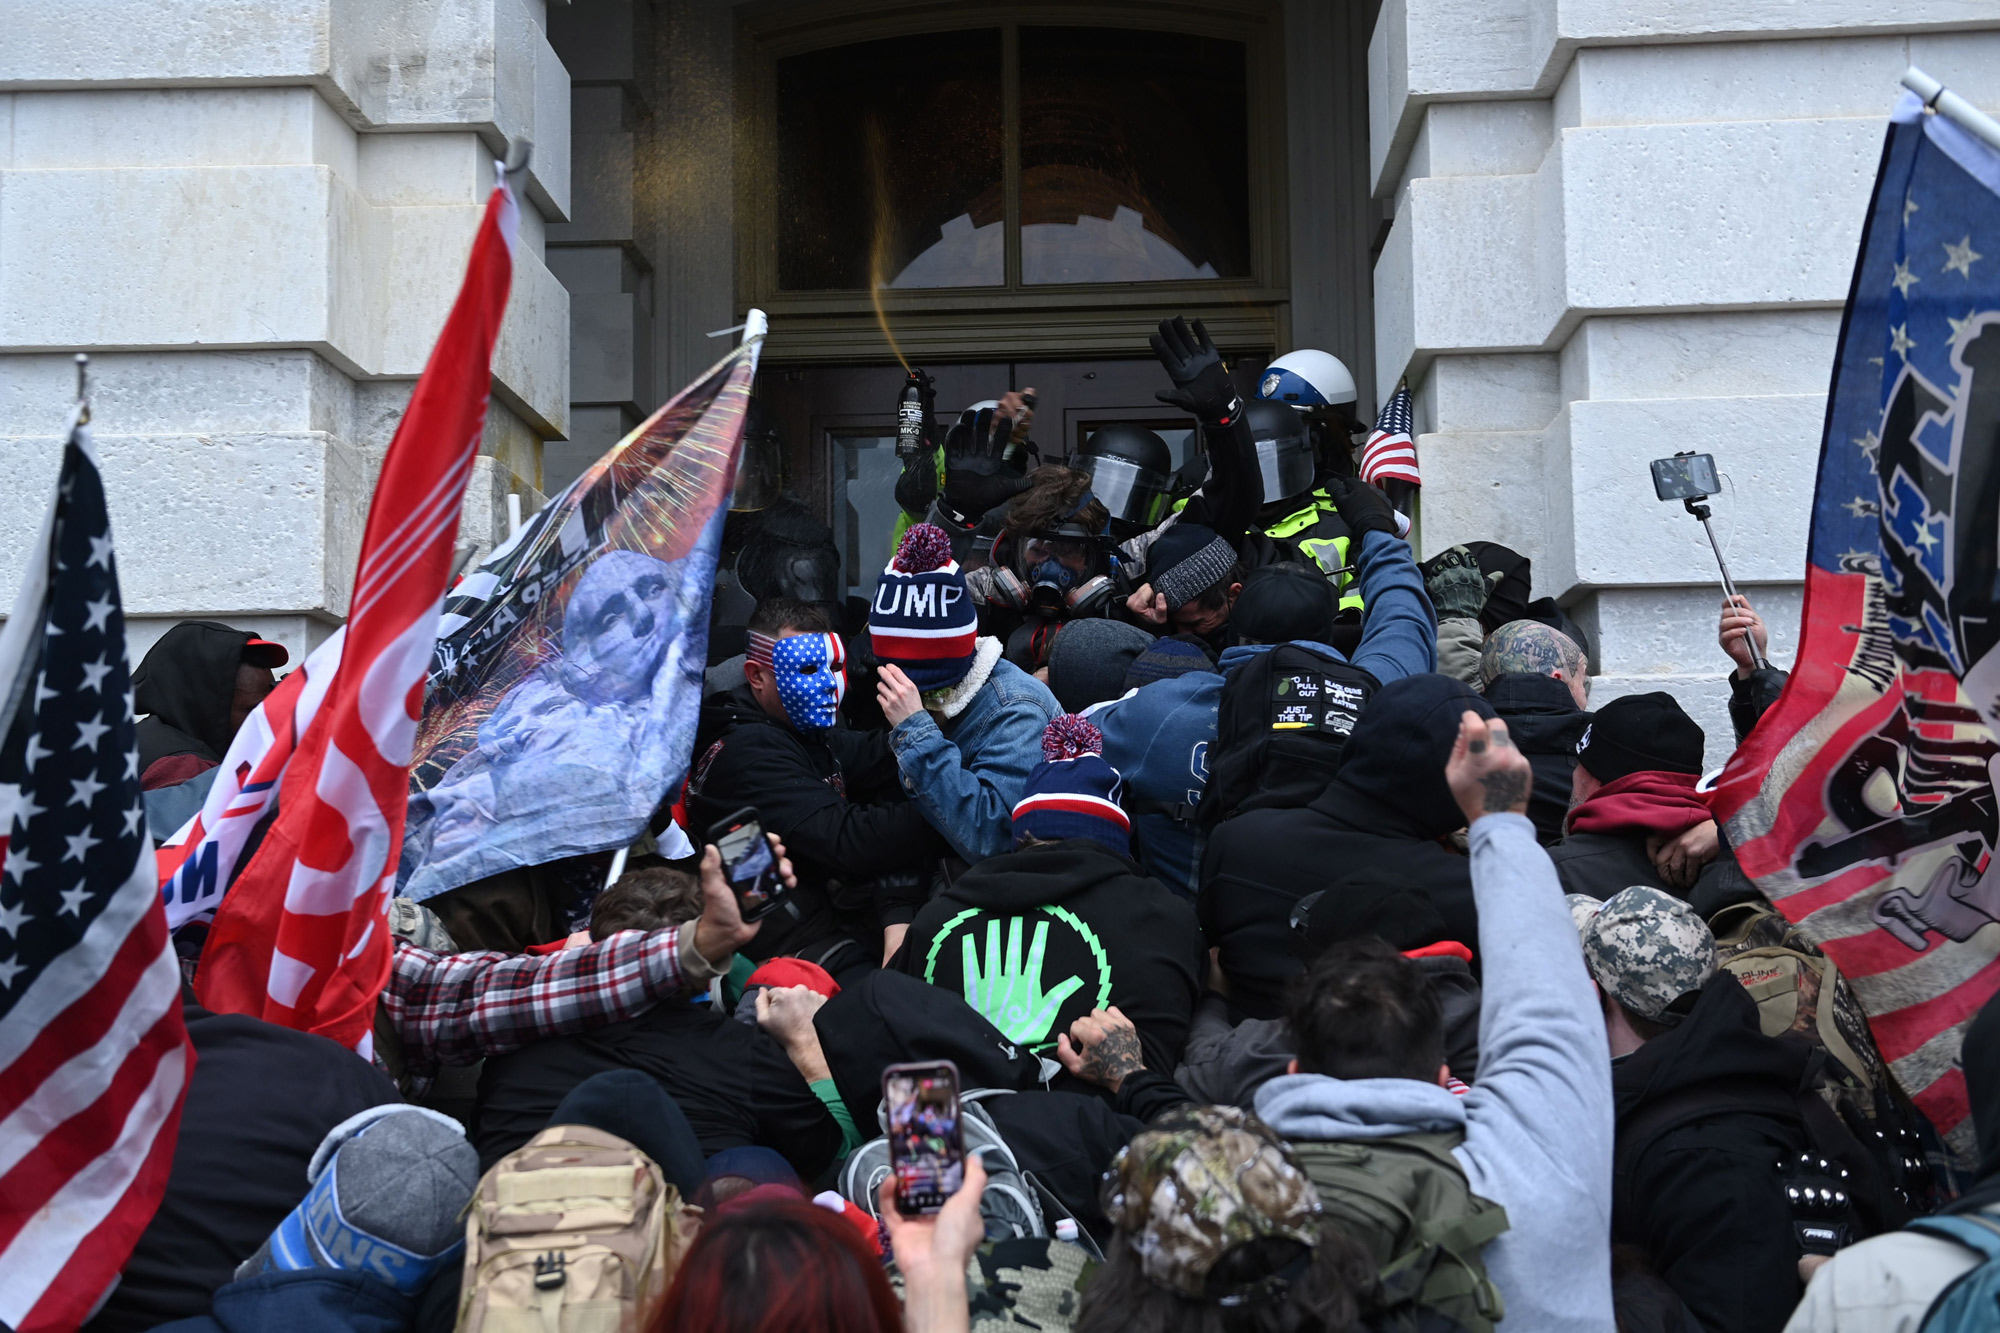 Trump supporters clash with police and security forces as they storm the US Capitol in Washington, DC, on January 6.